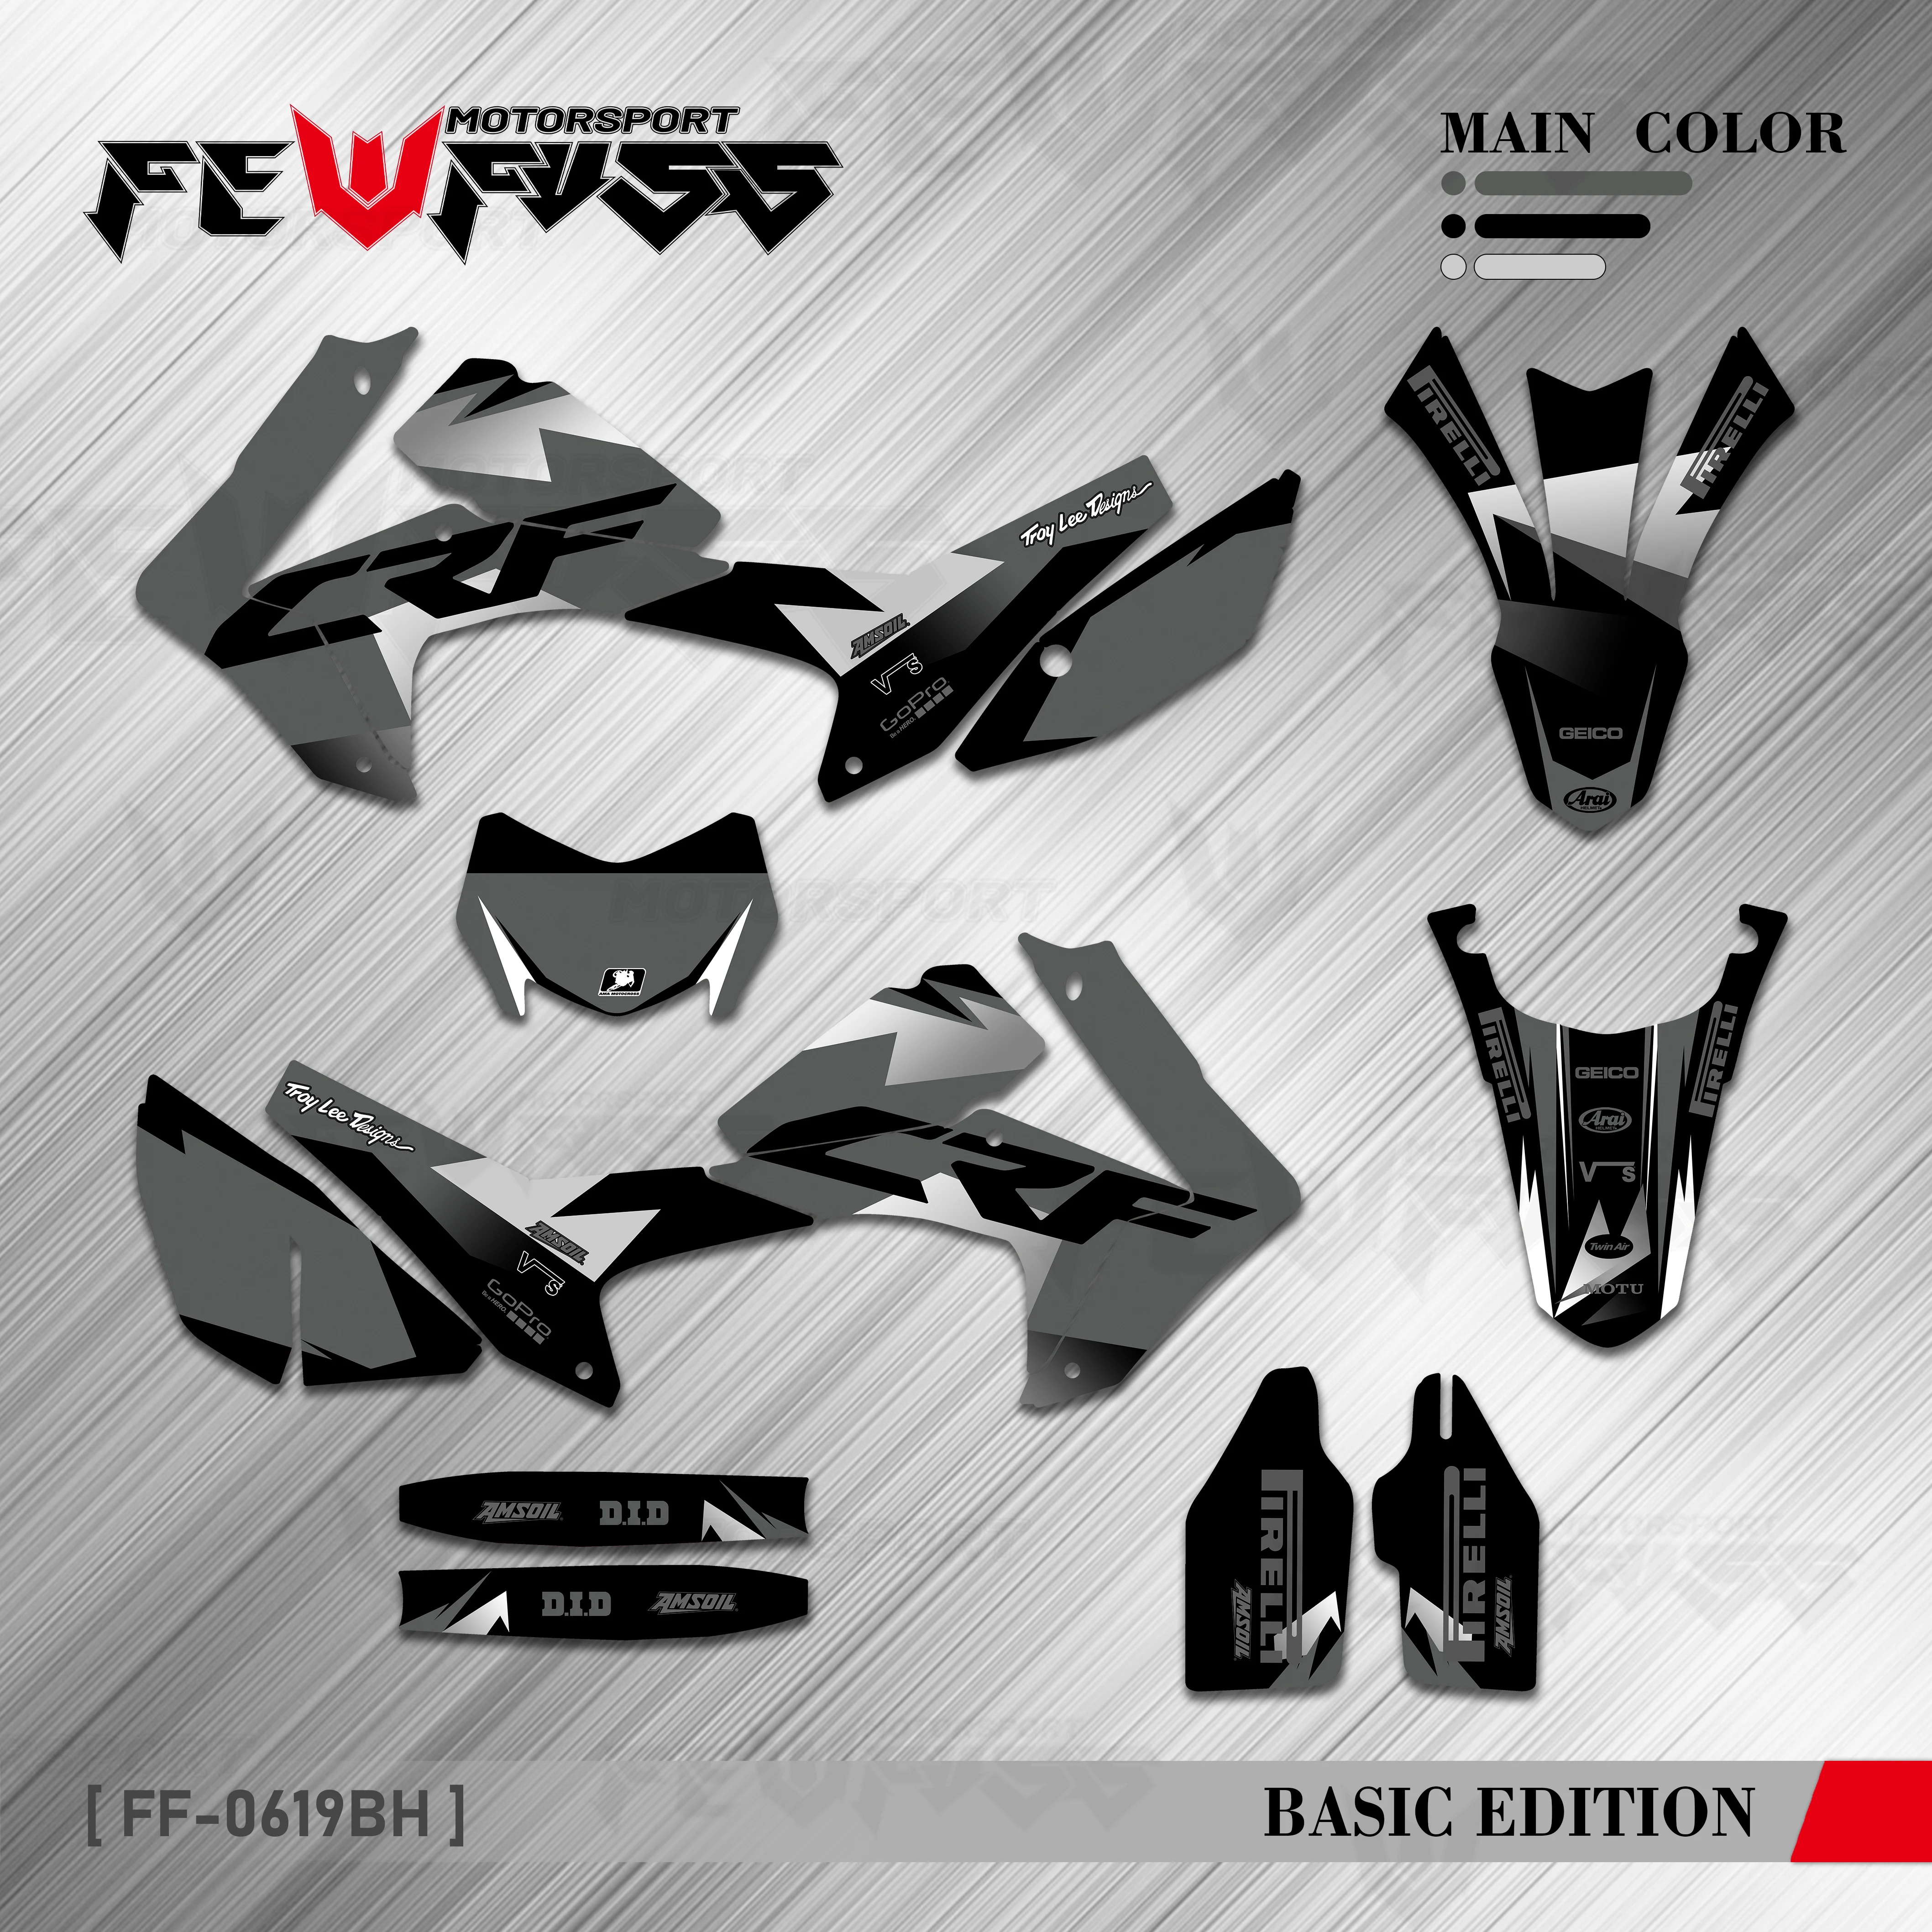 

FEWFUSS Graphics Decals Stickers Motorcycle Background For HONDA CRF250L CRF 250L 2012 2013 2014 2015 2016 2017 2018 2019 2020